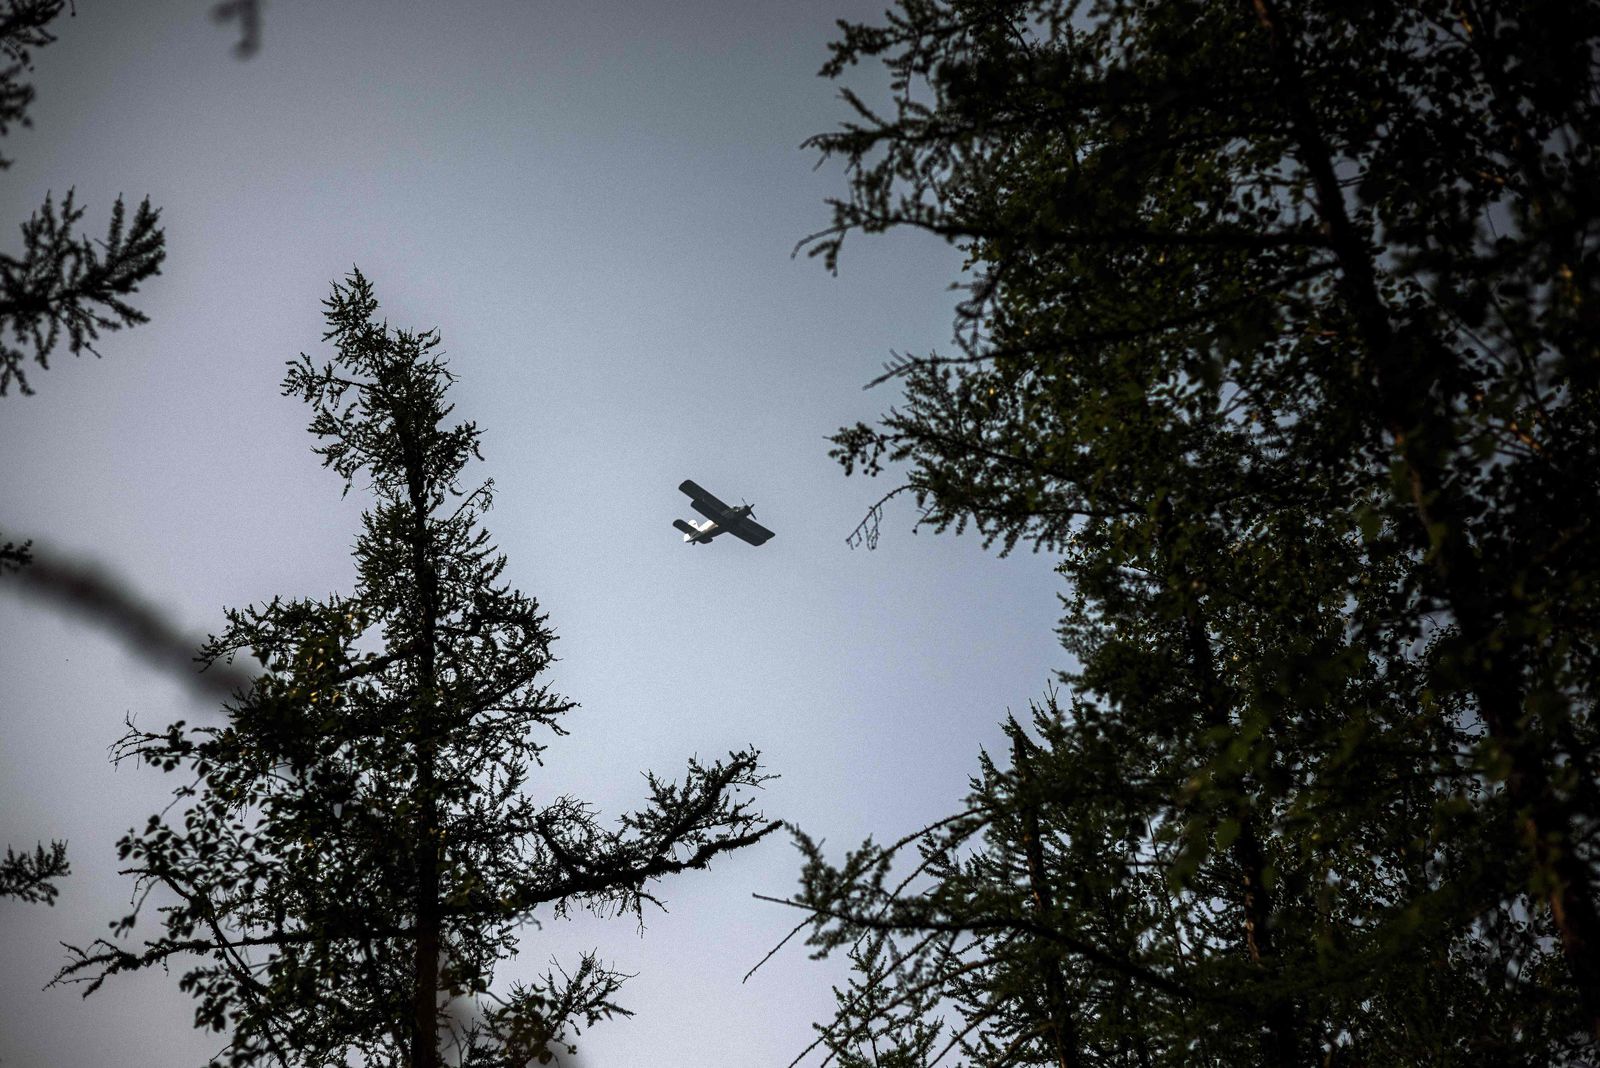 An aircraft of the Air Forest Protection Service flies over a forest at the edge of the village of Byas-Kyuel, on July 26, 2021. - Fuelled by a June heatwave, wildfires have swept through more than 1.5 million hectares of Yakutia's swampy coniferous taiga with more than a month still to go in Siberia's annual fire season. It is the third straight year that Russia's coldest region -- with a border on the Arctic ocean -- has seen wildfires so vicious that they have nearly overwhelmed its Aerial Forest Protection Service. (Photo by Dimitar DILKOFF / AFP) - AFP